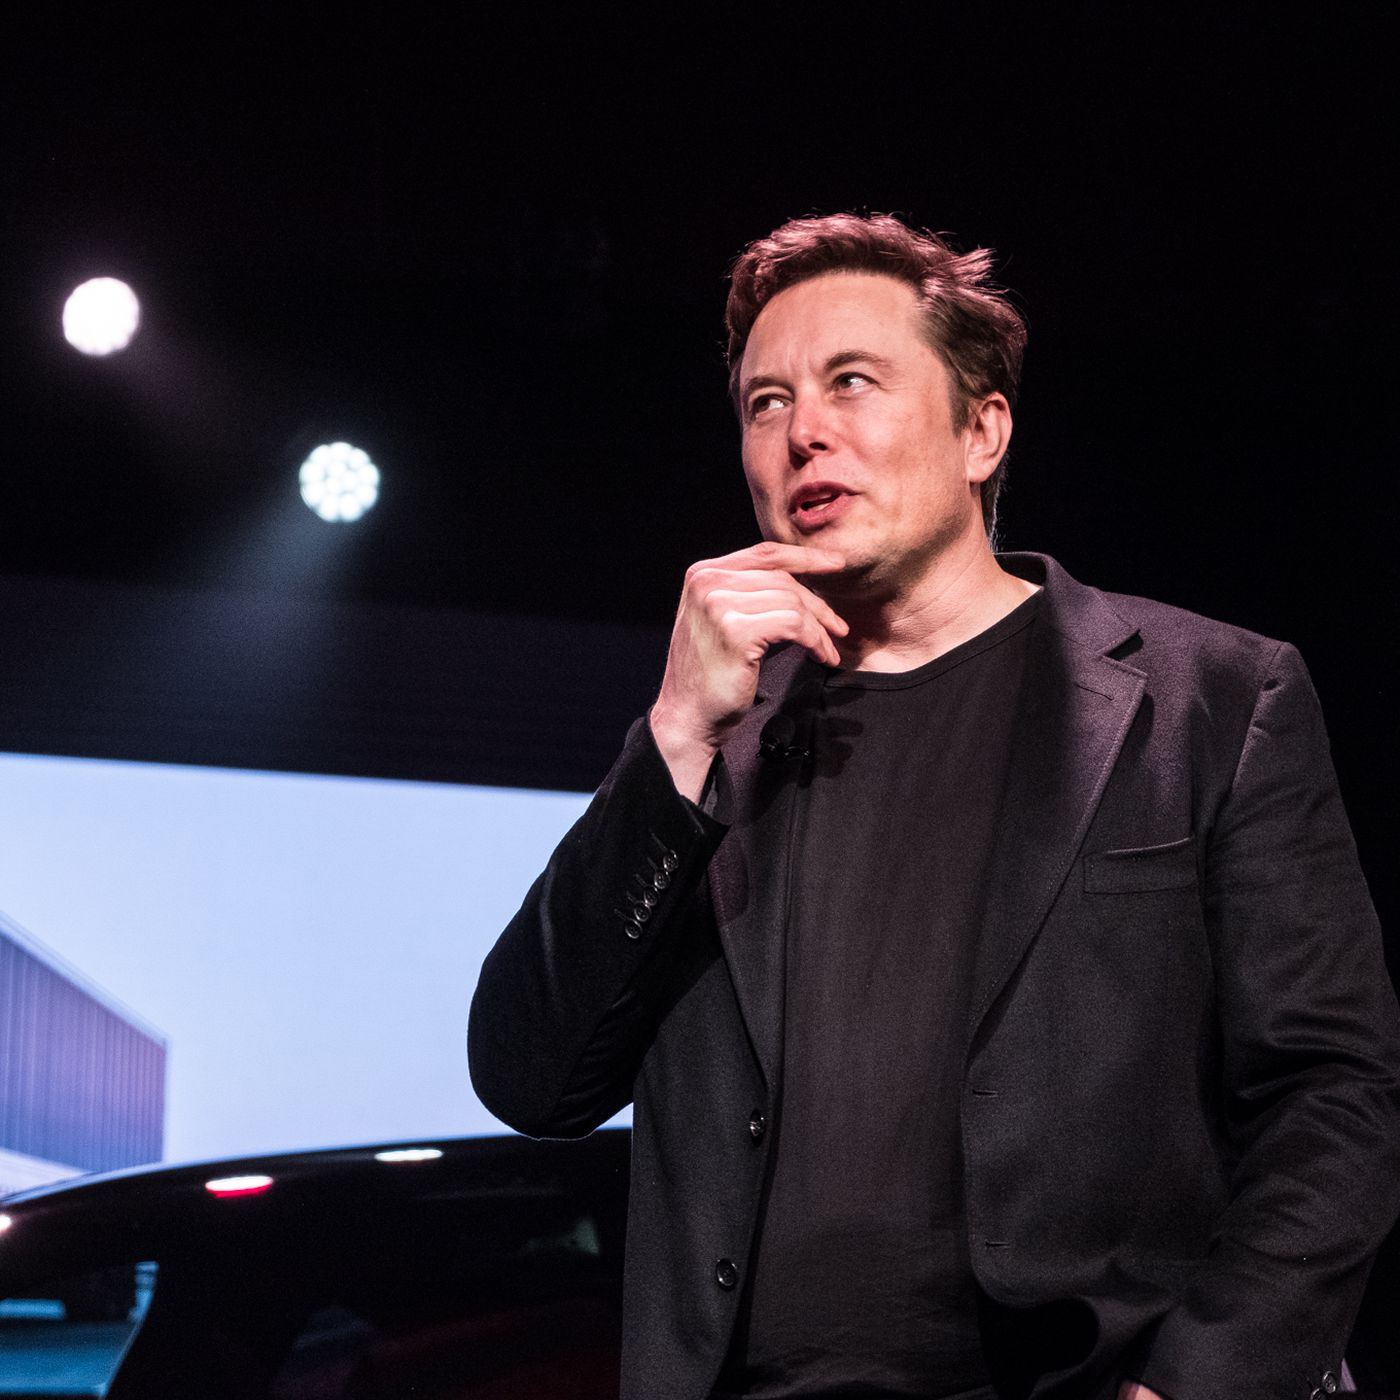 Elon Musk sets Tesla's resumption clause to accept Bitcoin transactions